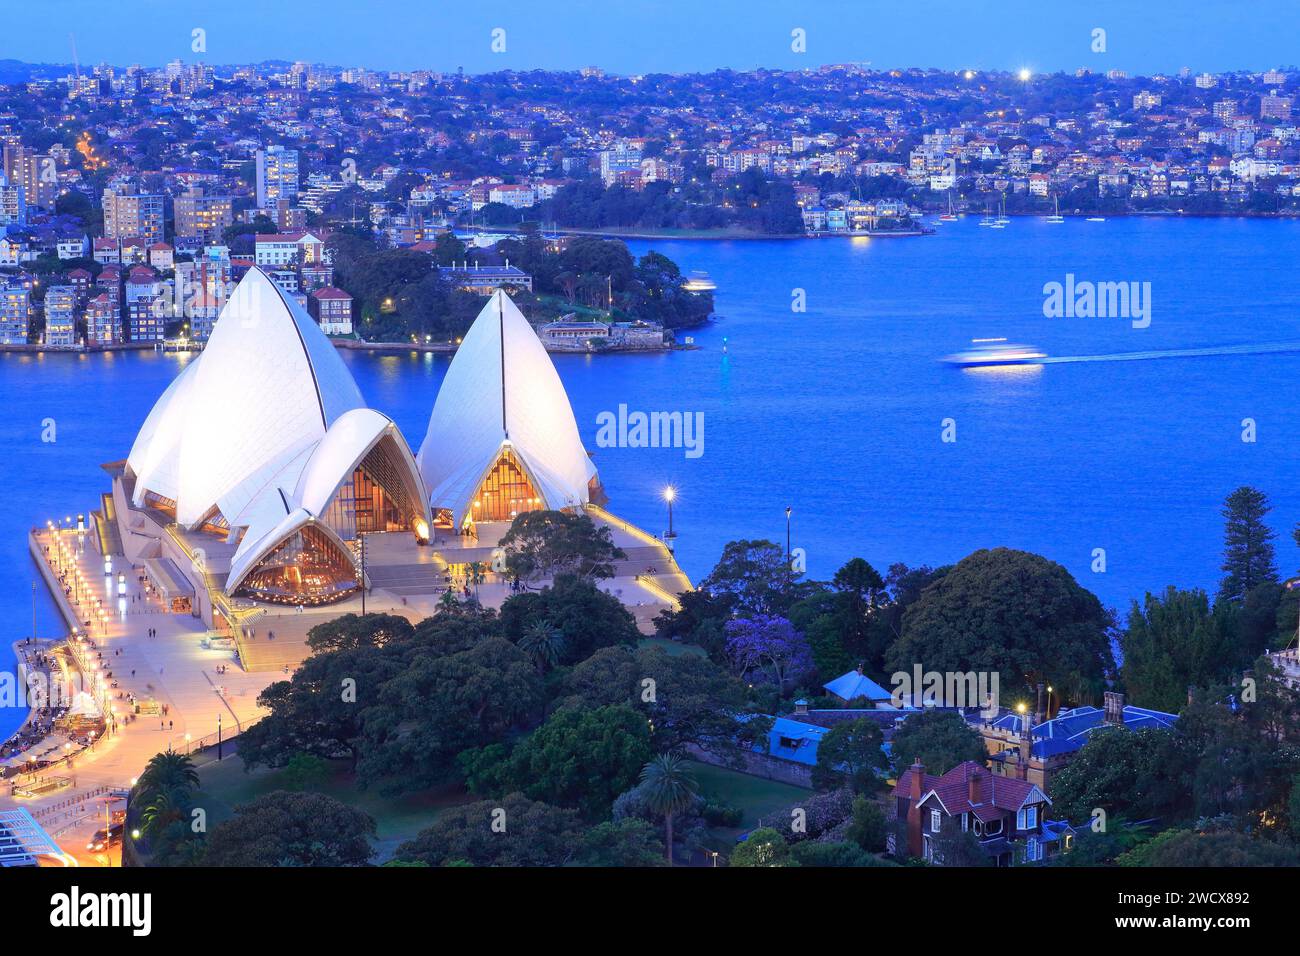 Australia, New South Wales, Sydney, view of Bennelong Point and the Opera House (Sydney Opera House) designed by the Dane Jørn Utzon with Sydney North in the background Stock Photo